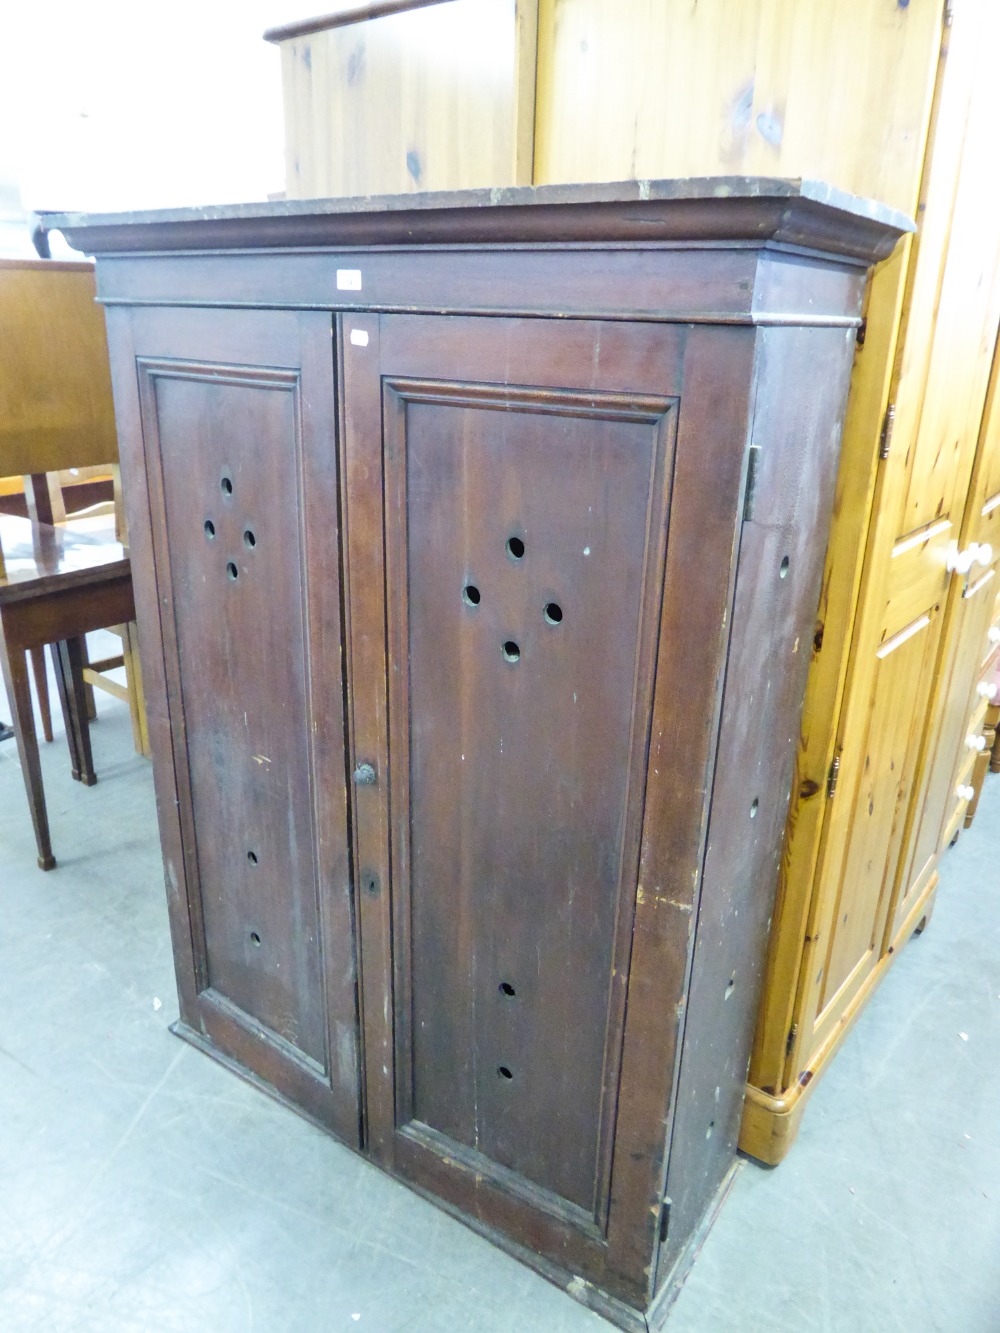 LARGE, TWO PANEL DOOR, STAINED WOOD STORAGE CUPBOARD (as found)